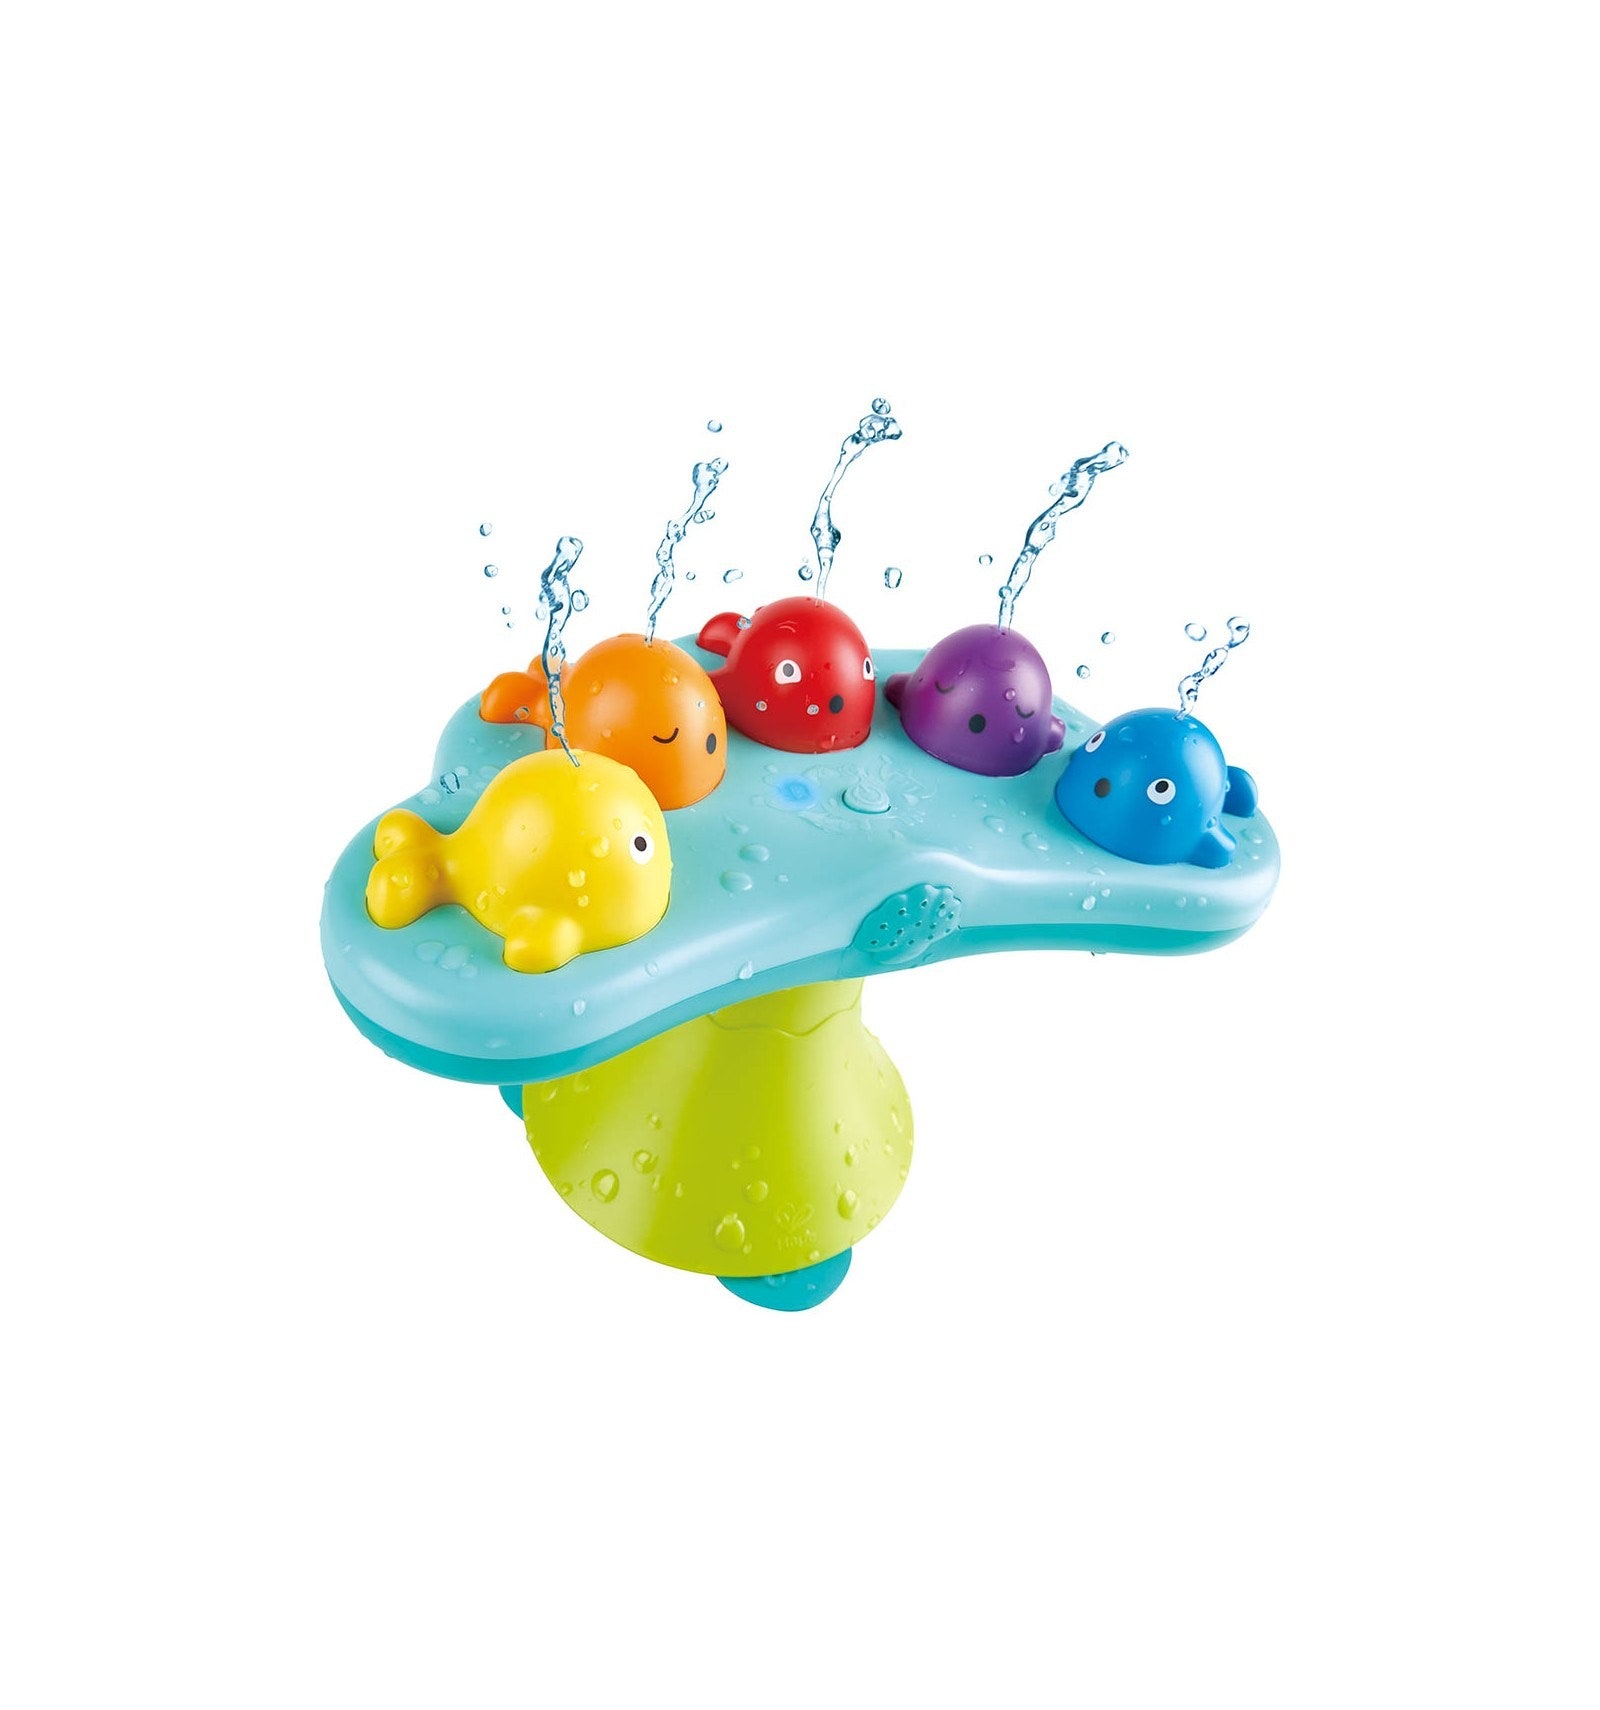 There's an endless array of baby bath toys that'll serve as wonderful distractions while their parents are going in on those neck folds, but one that's a musical fountain is hard to beat. $42, Target. <a href="https://www.target.com/p/hape-musical-whale-fountain-bath-pool-toy/-/A-83959839">Get it now!</a>